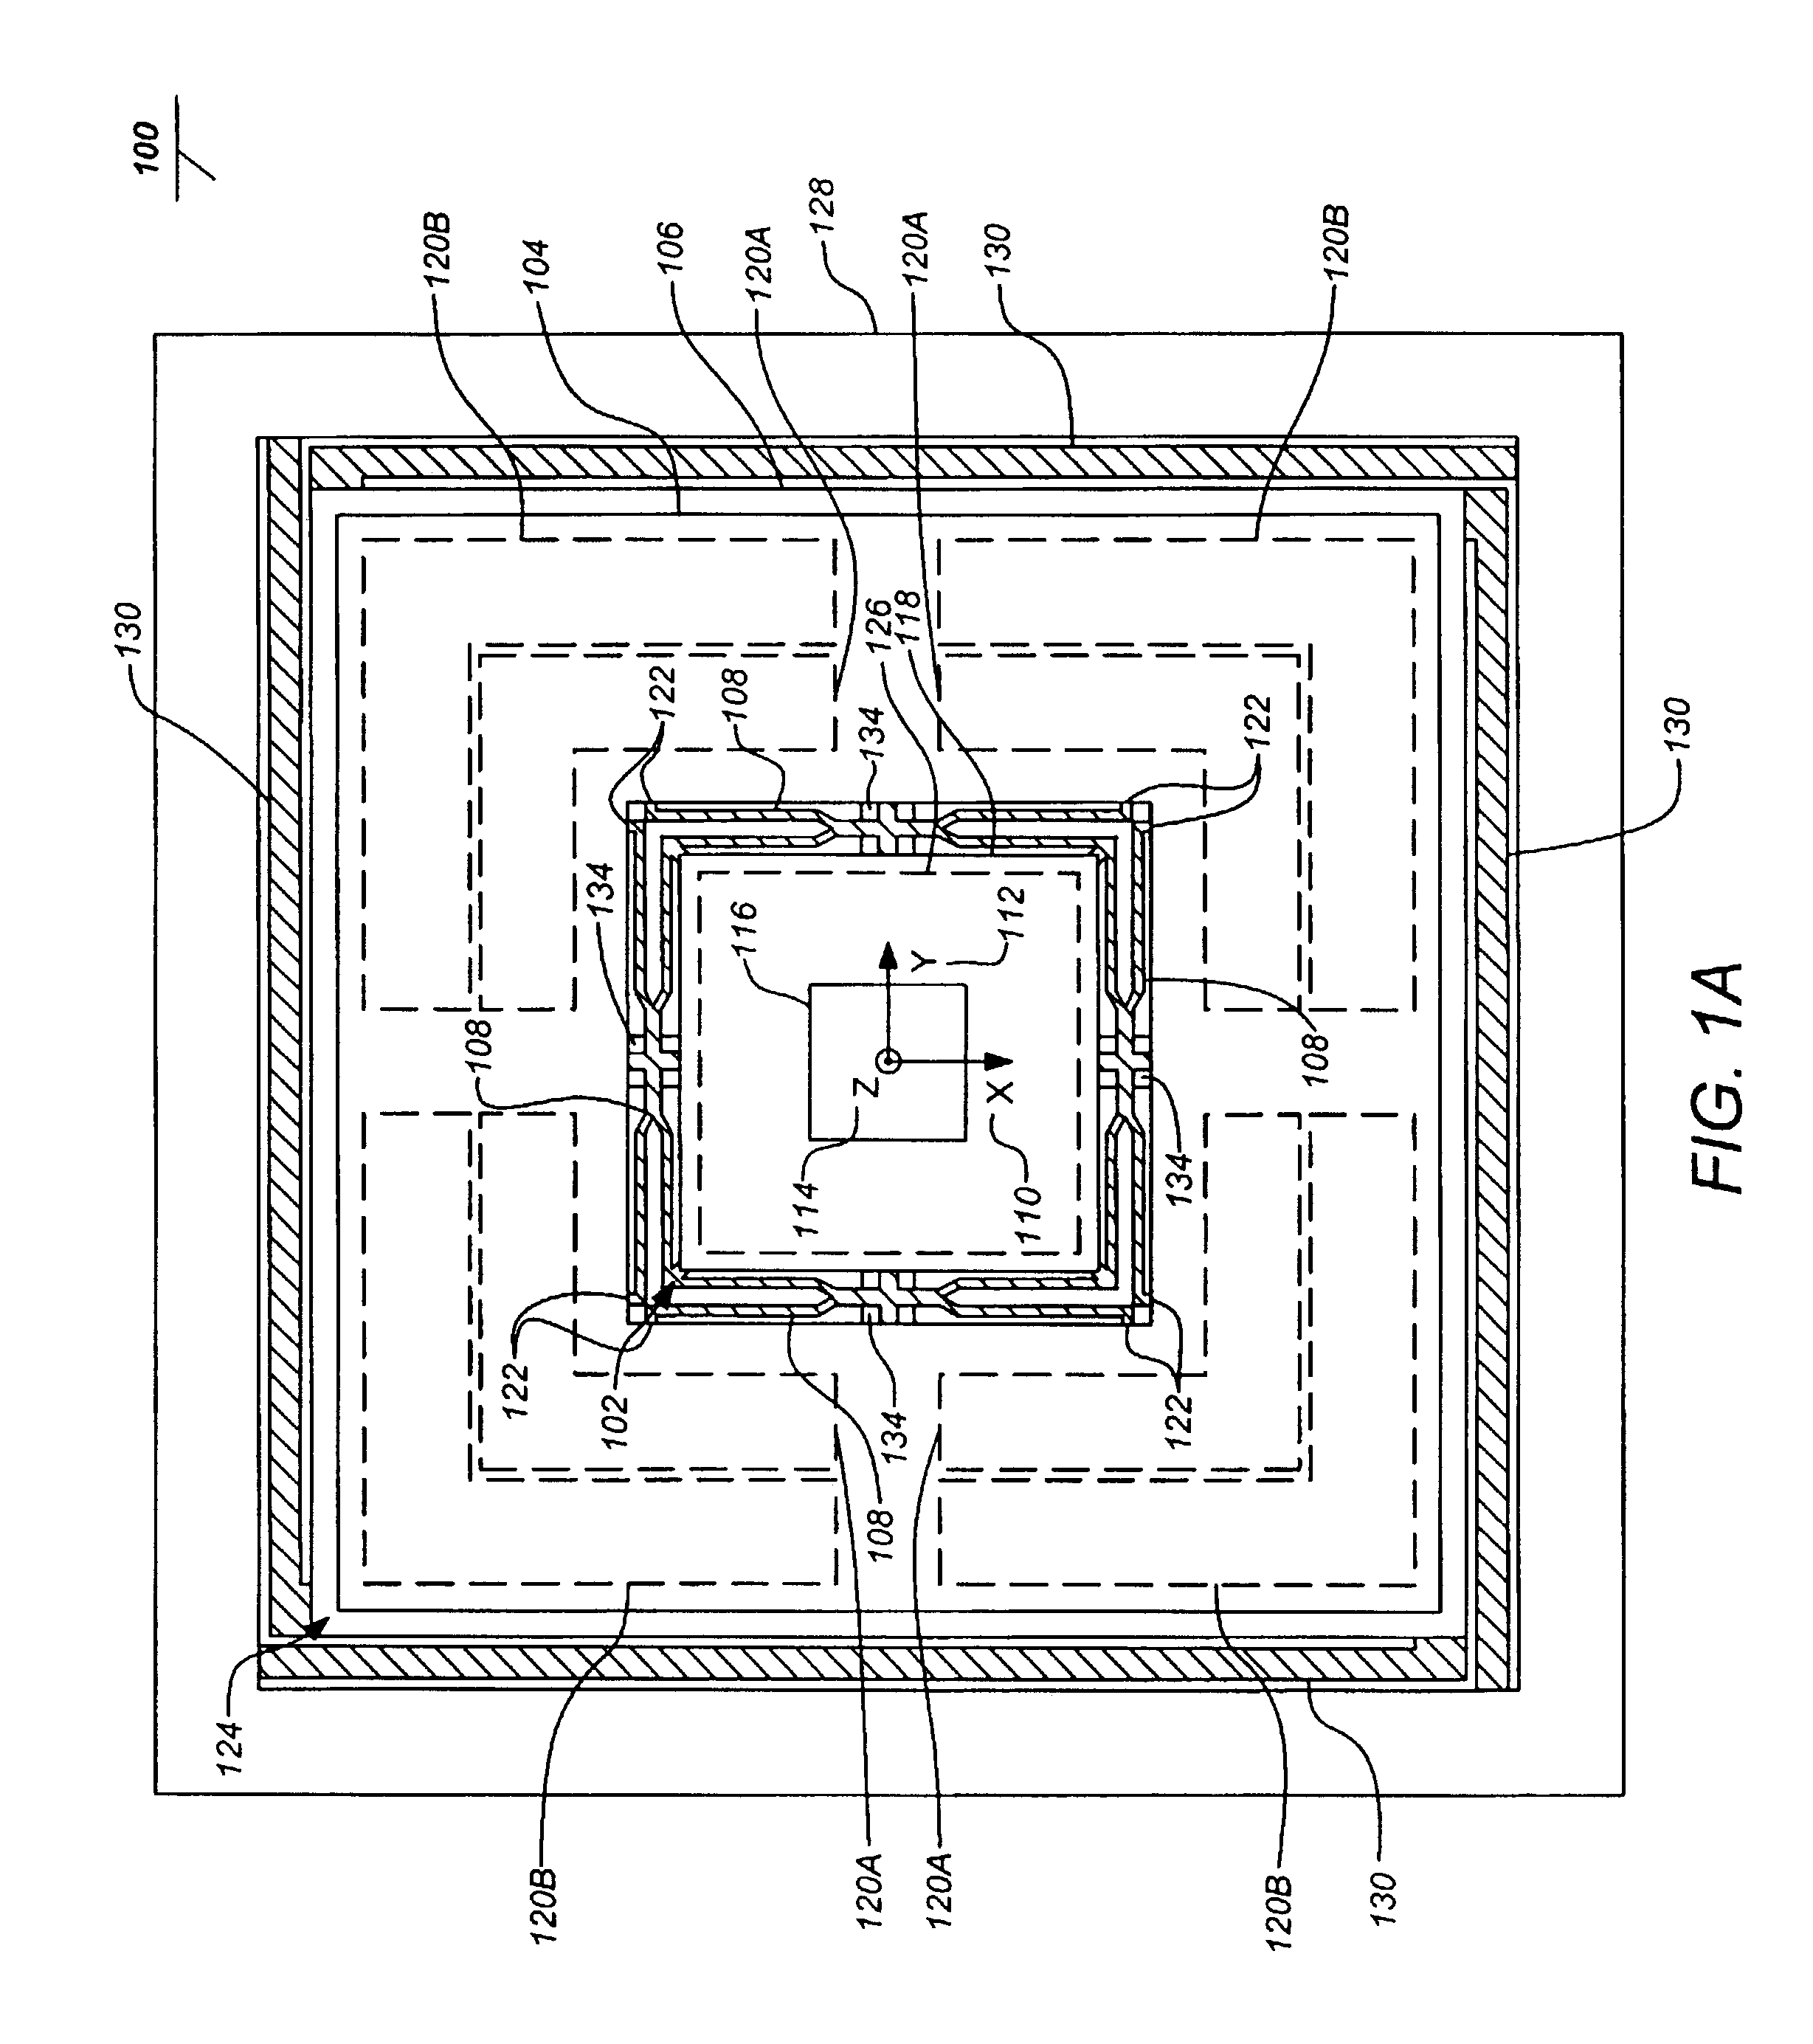 Isolated resonator gyroscope with compact flexures